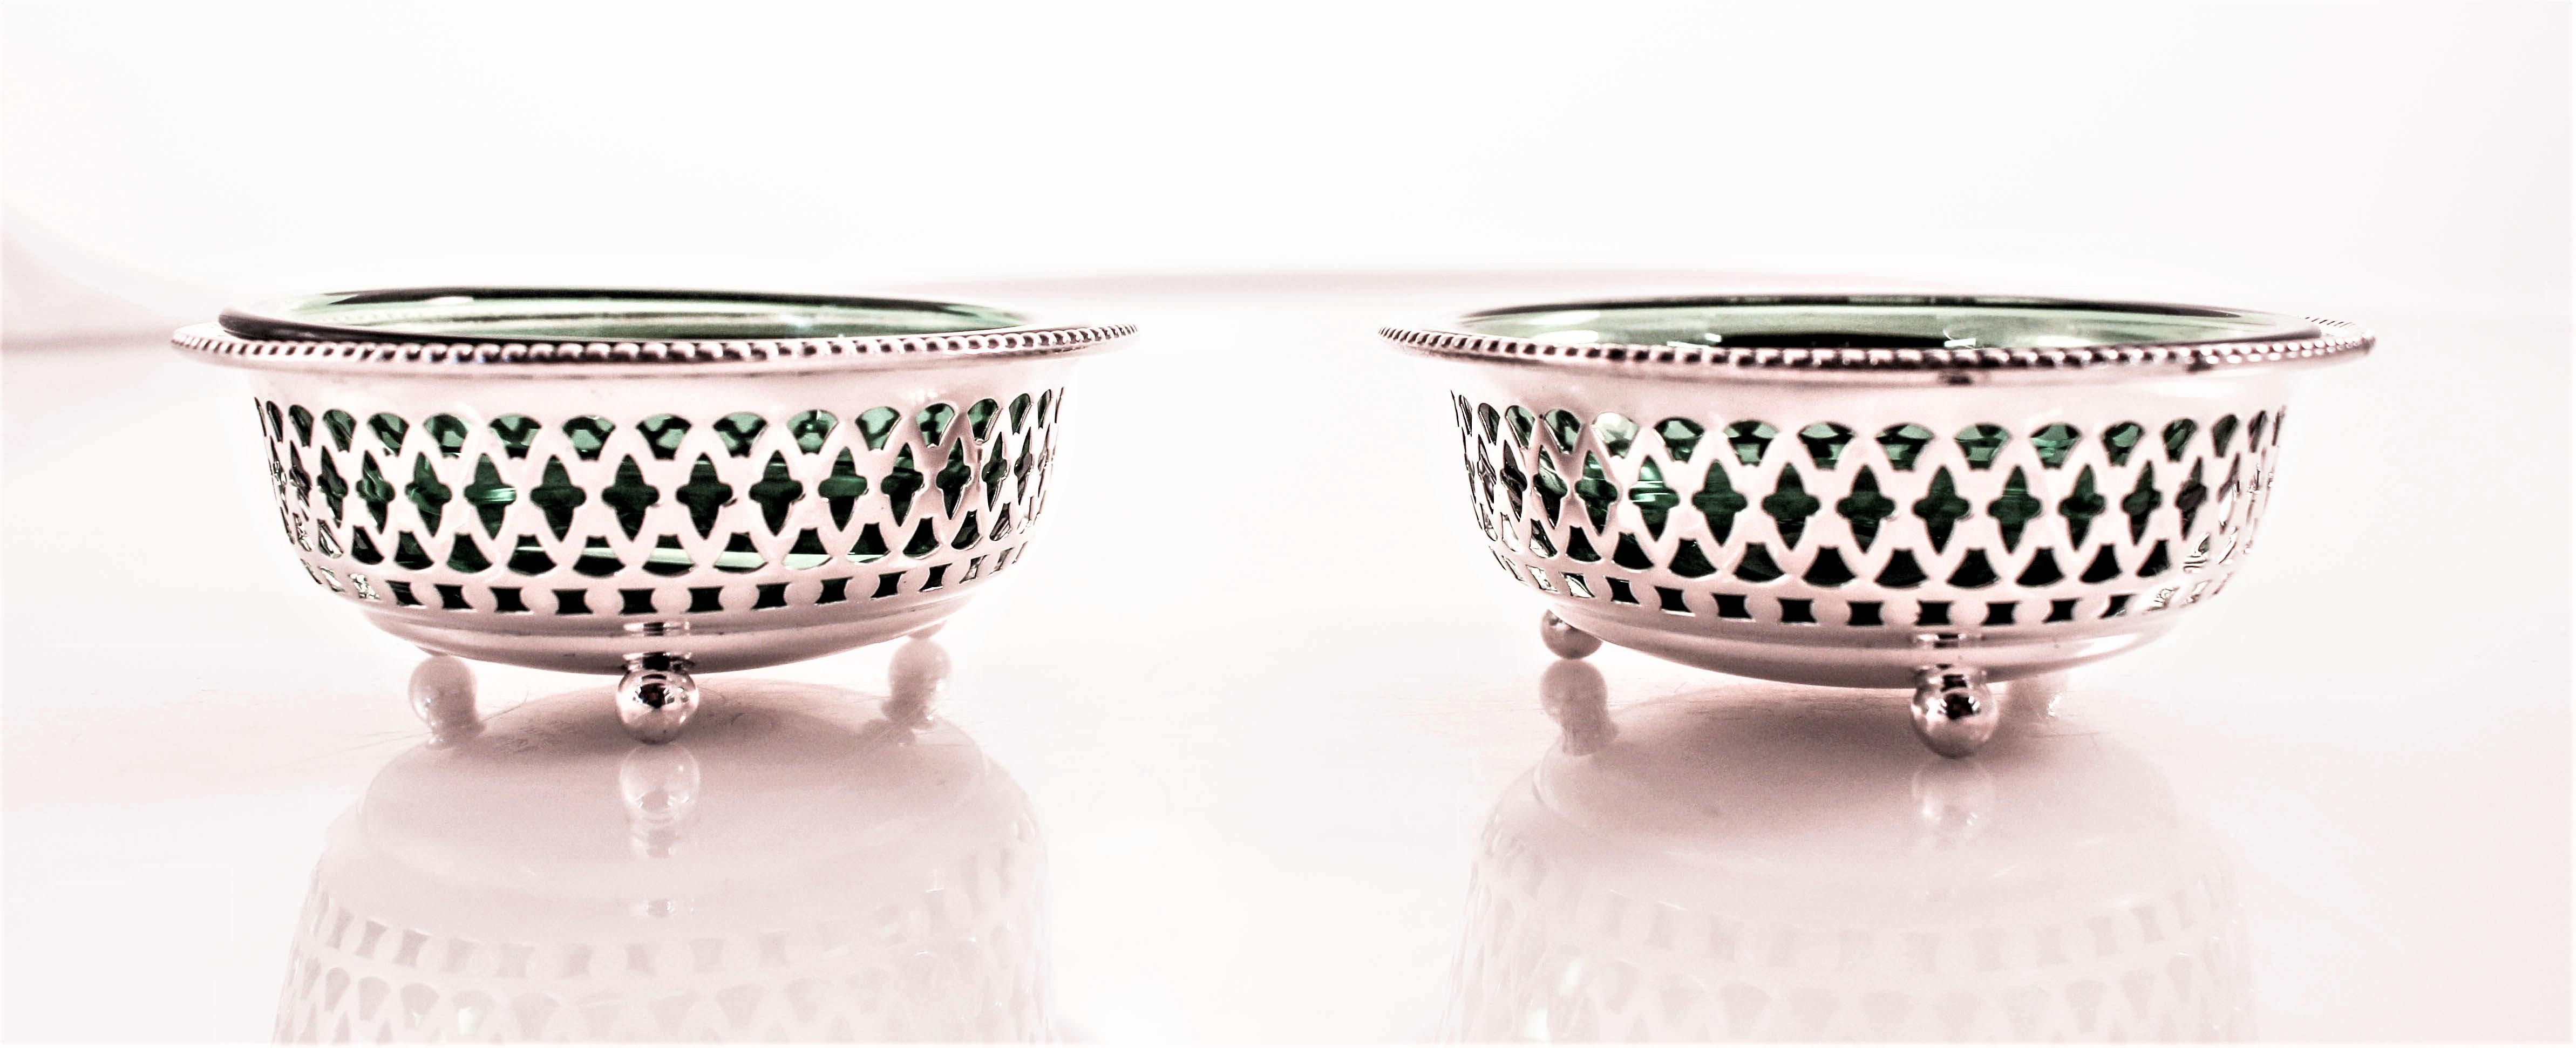 A pair of sterling salt cellars by the Gorham Corporation of Rhode Island. The have lattice work around the entire body and removable green liners to hold the salt. The rich green glass looks stunning and pops out from between the cutout work. They